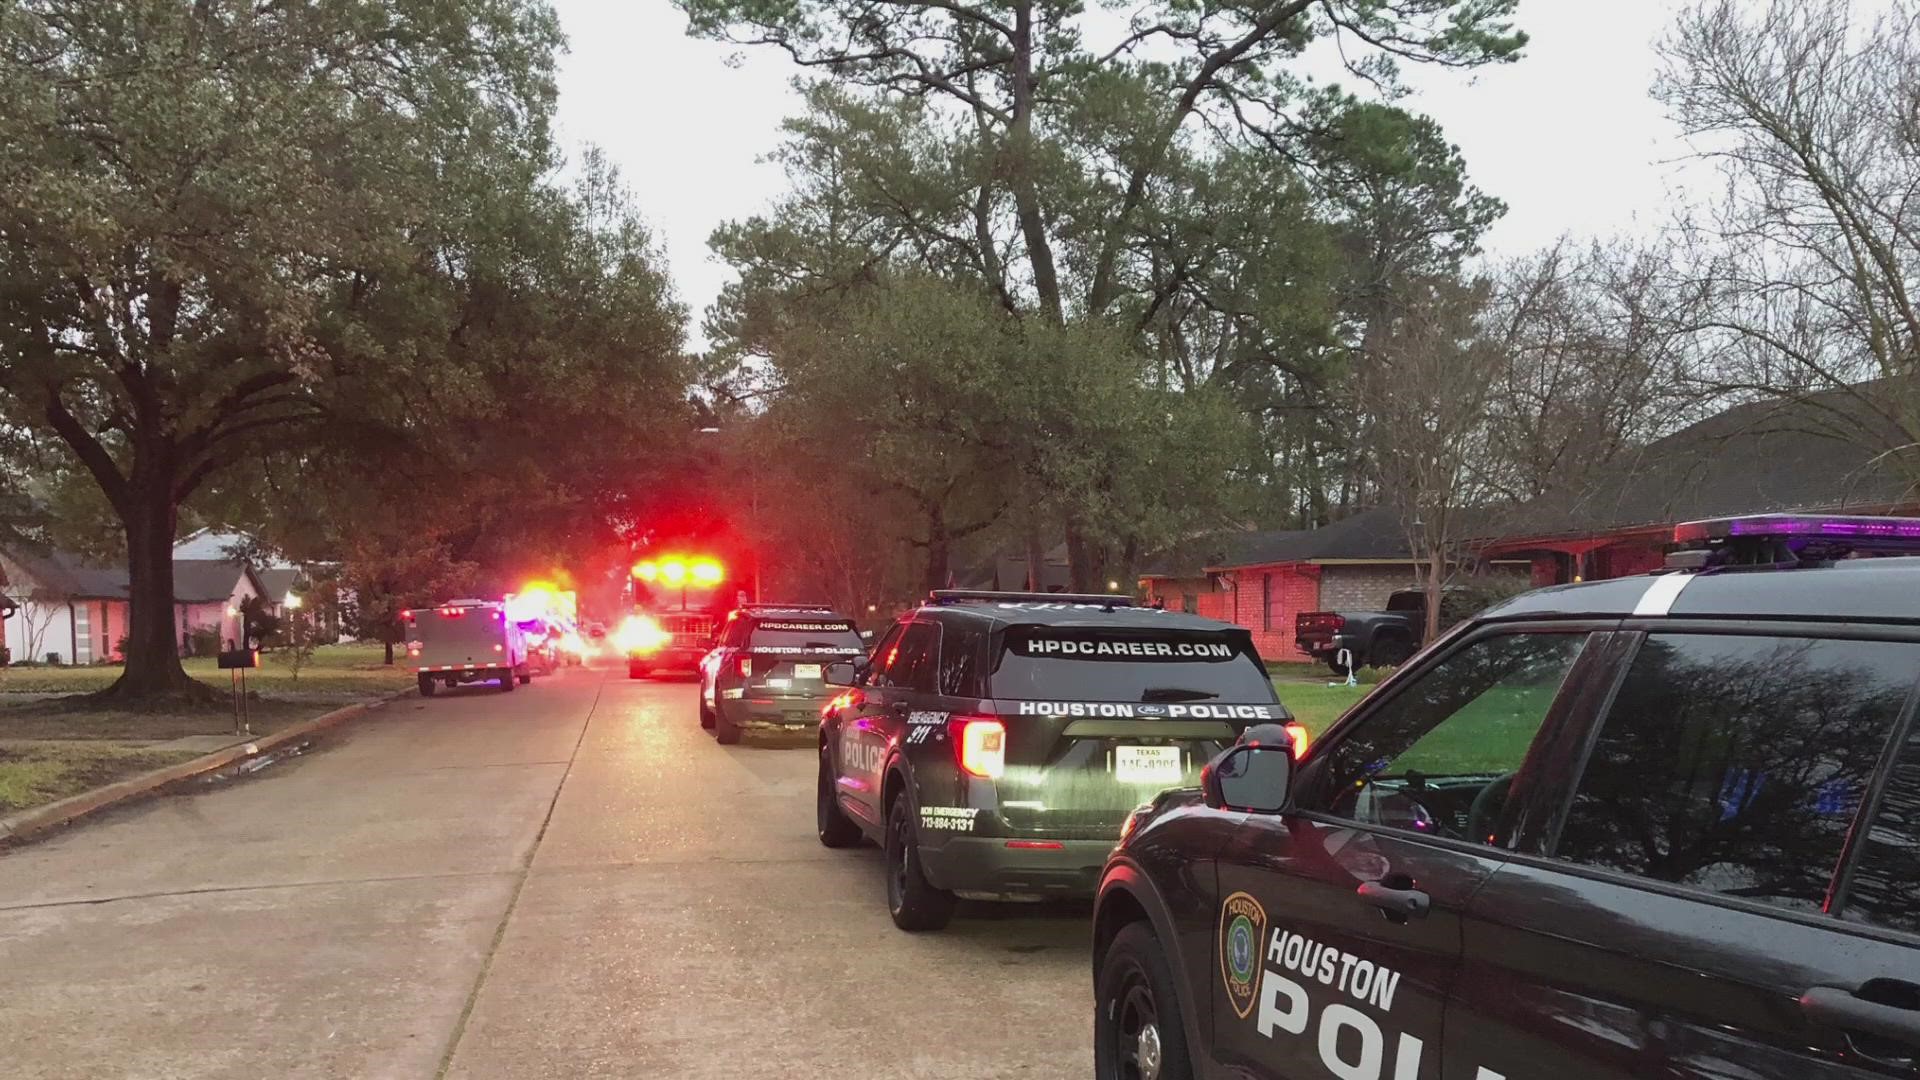 A man was killed by his neighbor's dogs Wednesday in the Acres Homes area, according to Houston police.